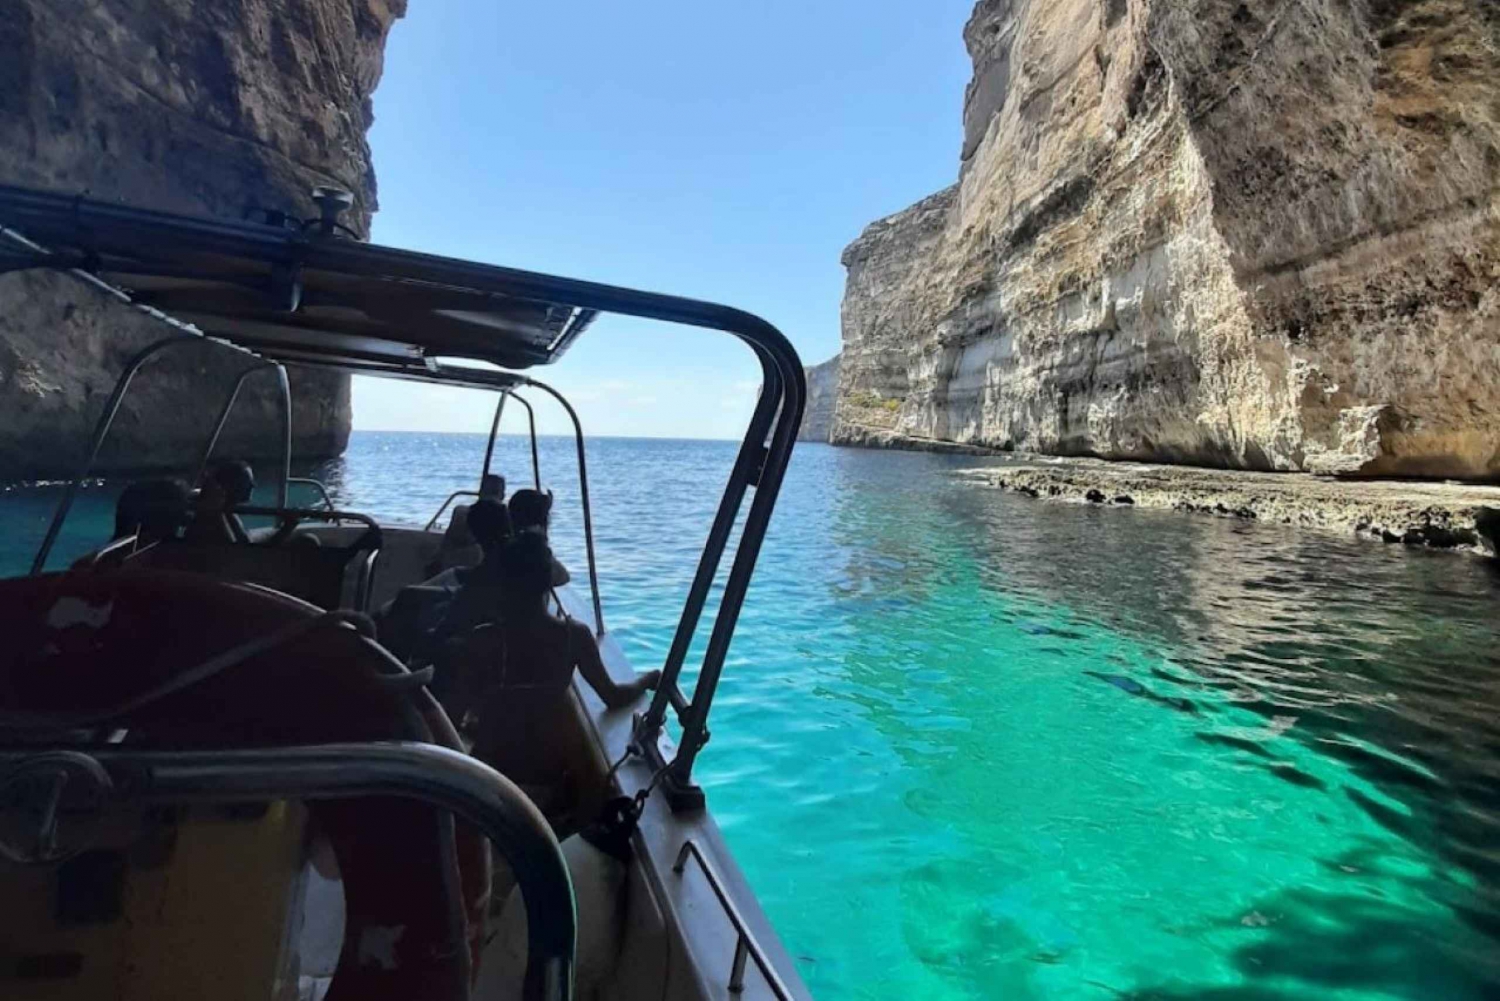 Comino: Santa Maria Caves Scenic Boat Tour with Snorkeling